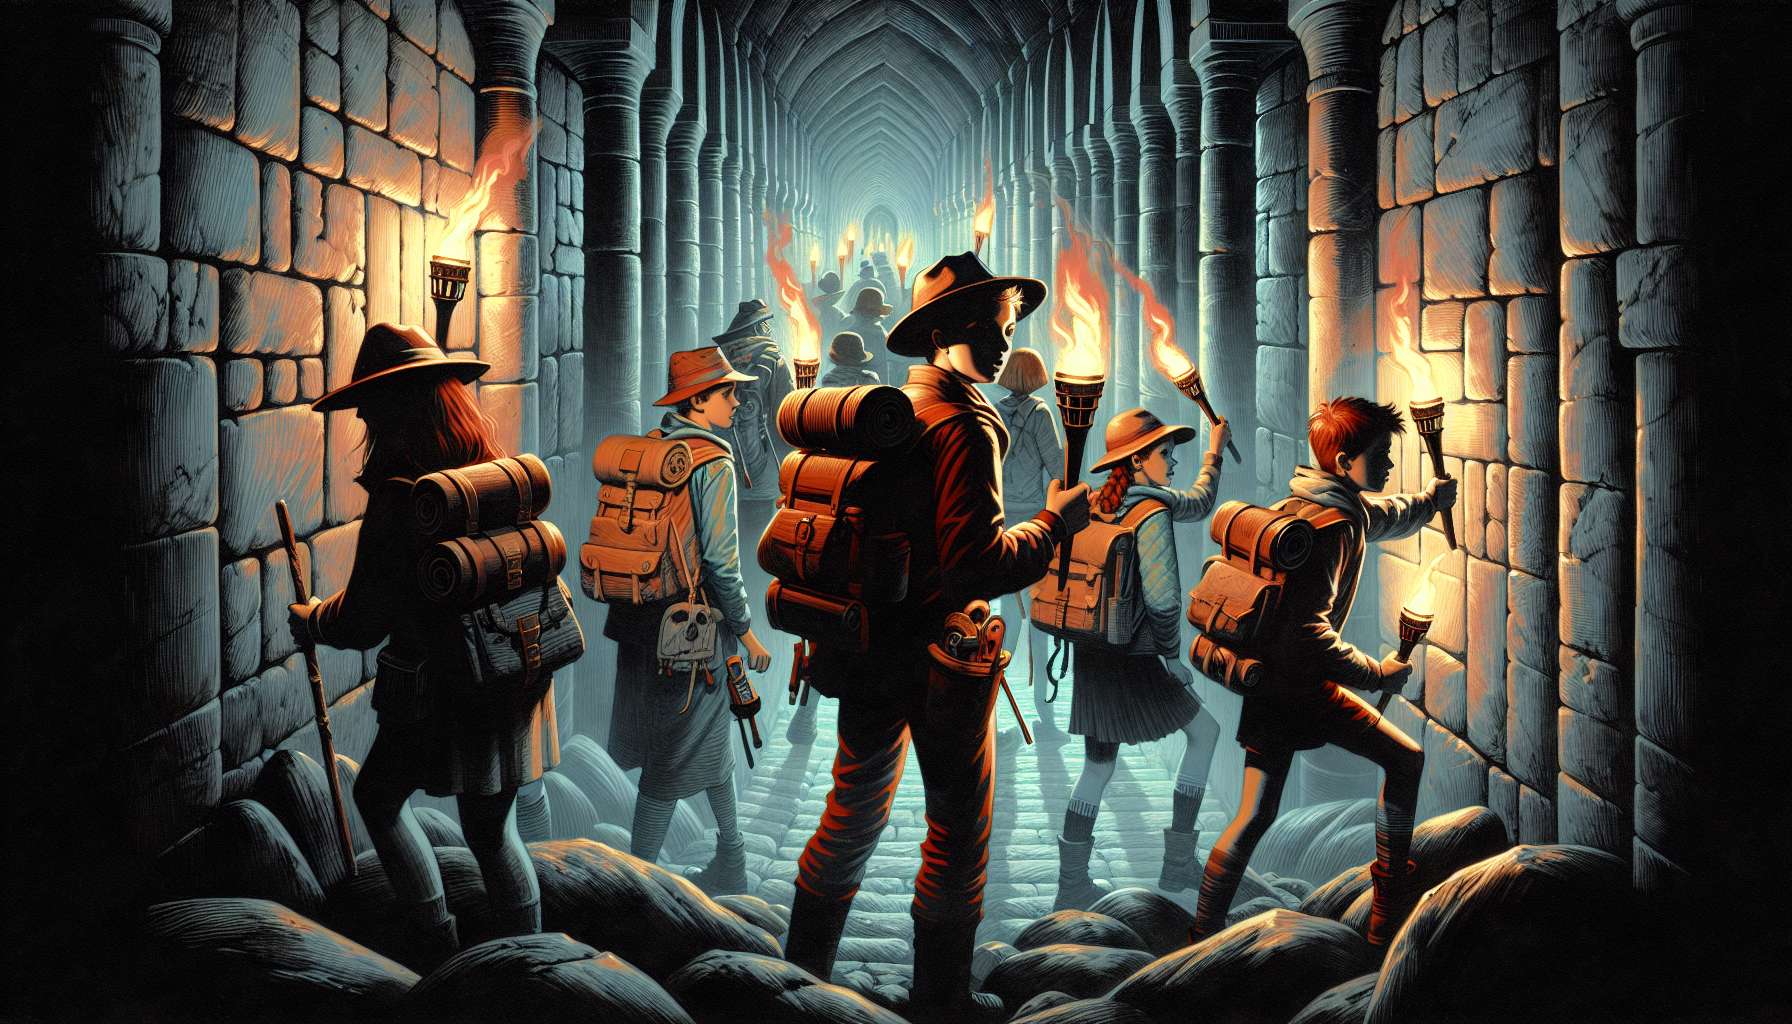 Illustration of high school students exploring a dungeon